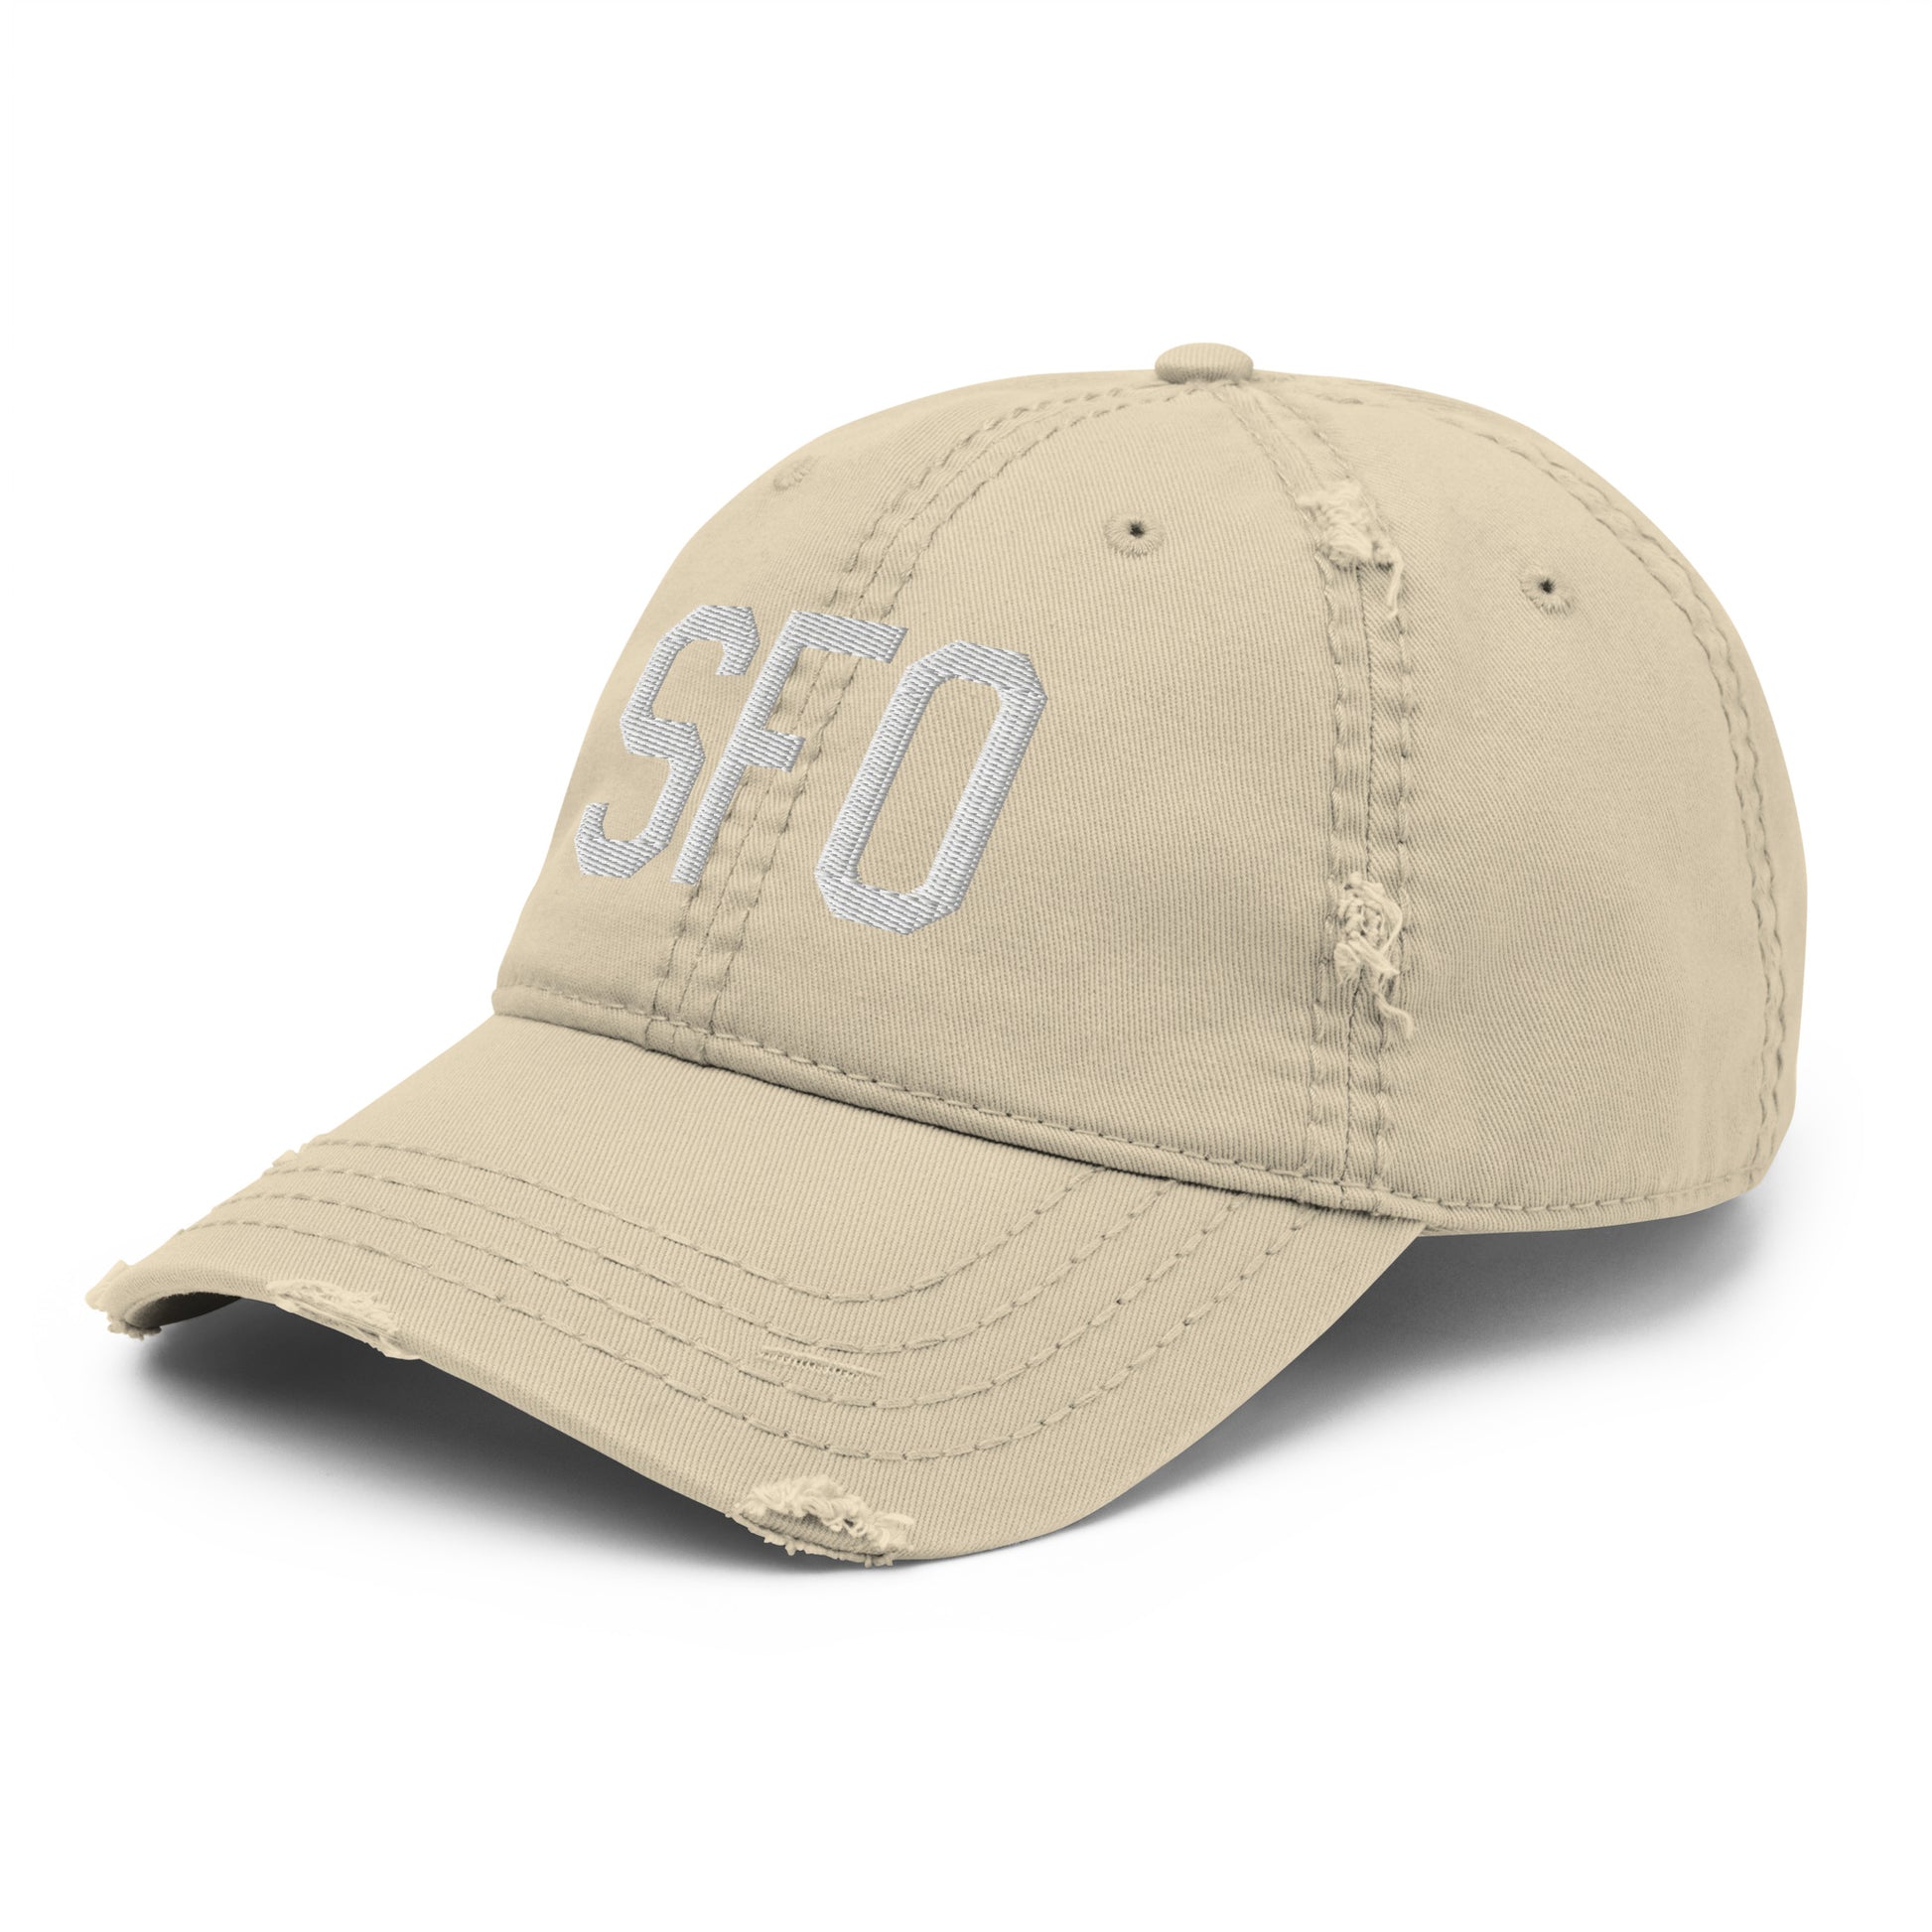 Airport Code Distressed Hat - White • SFO San Francisco • YHM Designs - Image 19